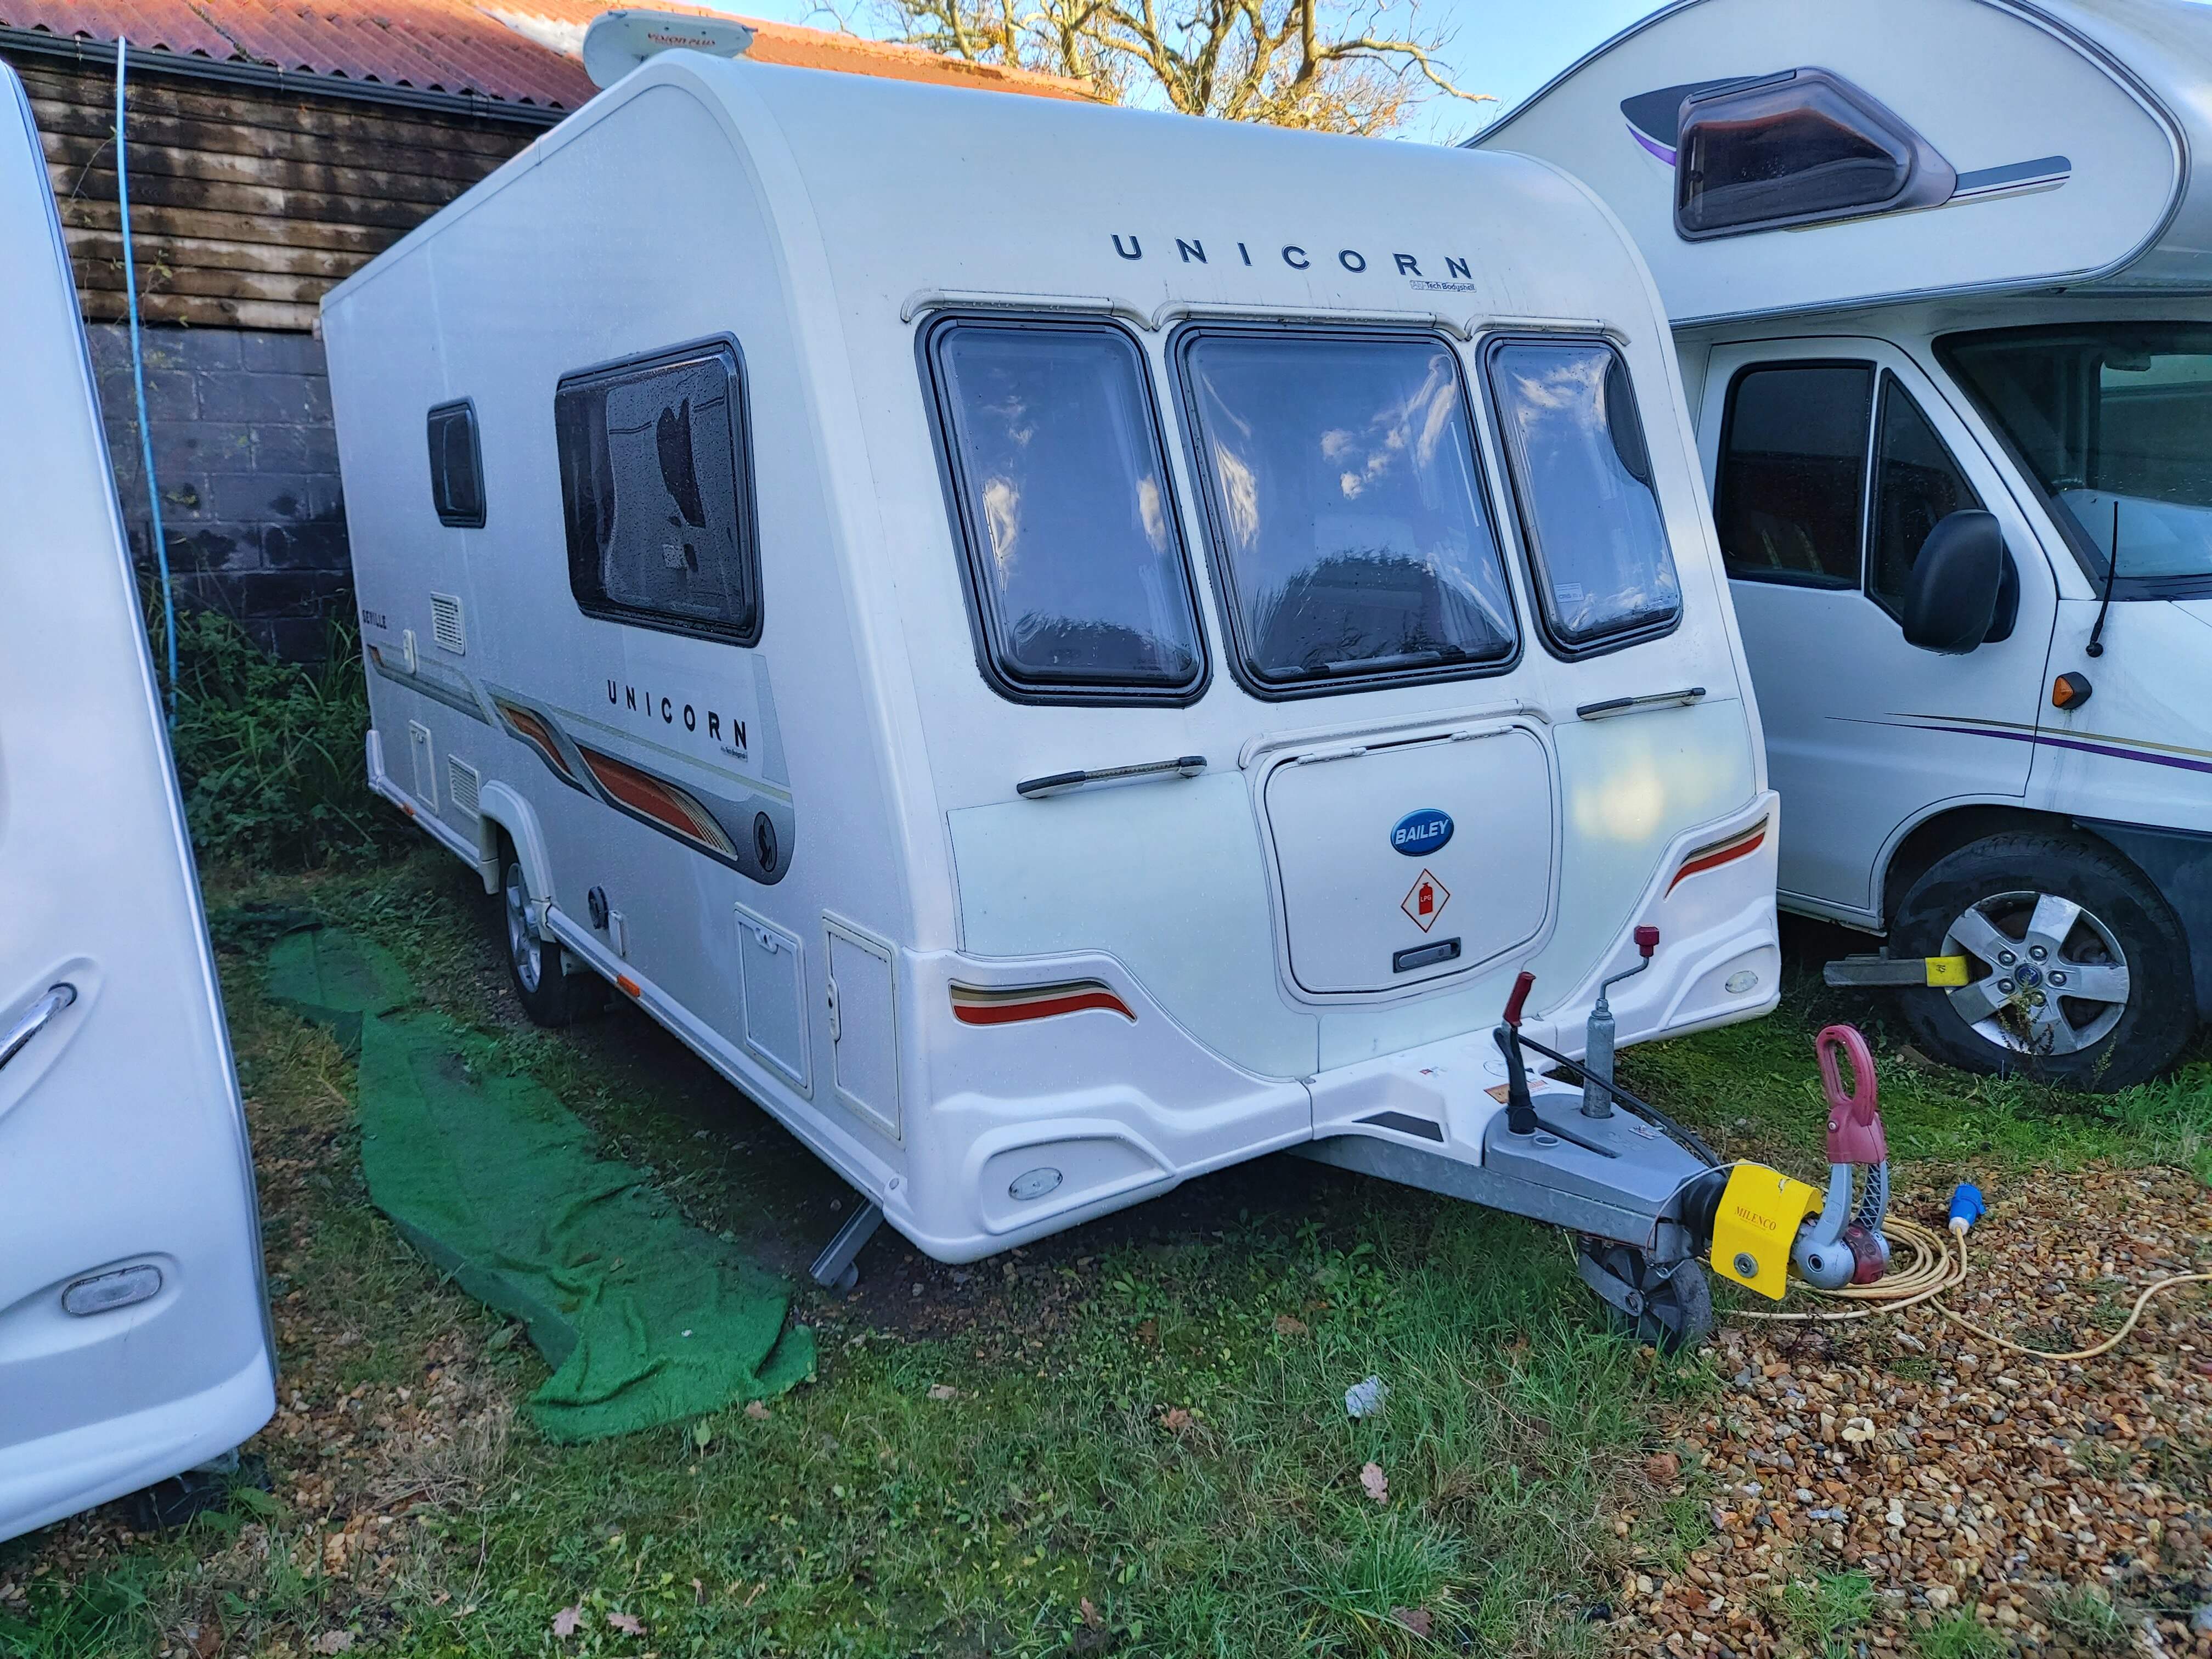 NOW SOLD 2011 Bailey Unicorn Seville 2 Berth End Washroom Caravan with Motor Mover,